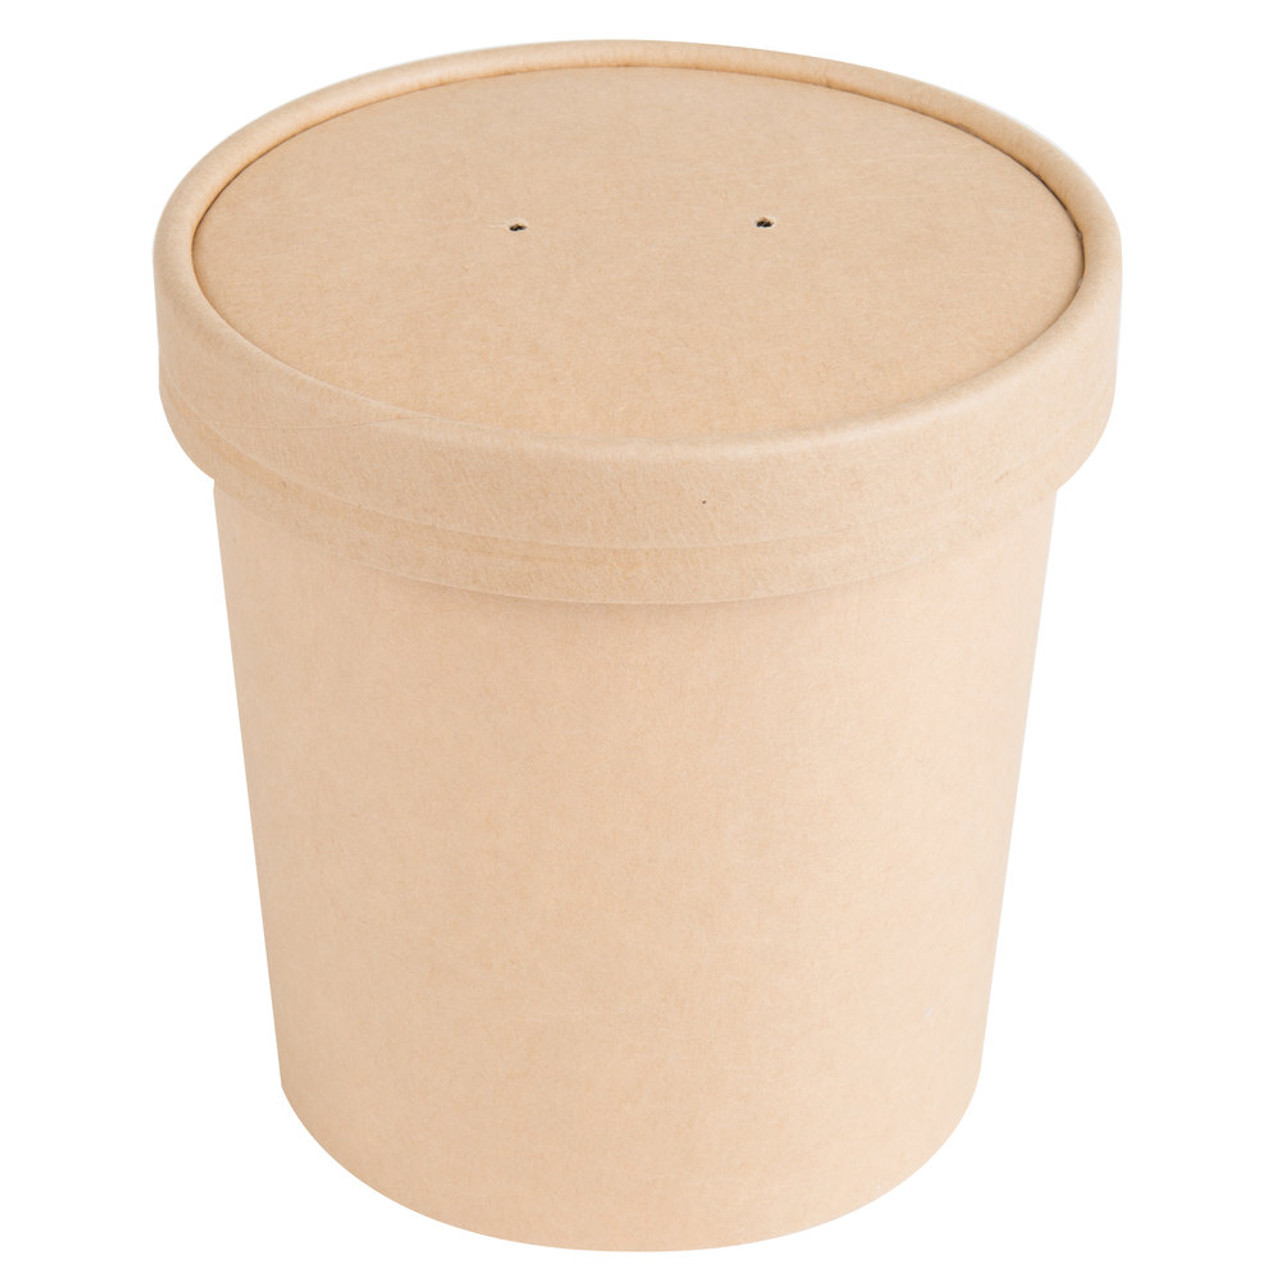 Kraft Compostable Paper Soup / Hot Food Cup with Vented Lid - 250/Case-Eco 16 oz. 